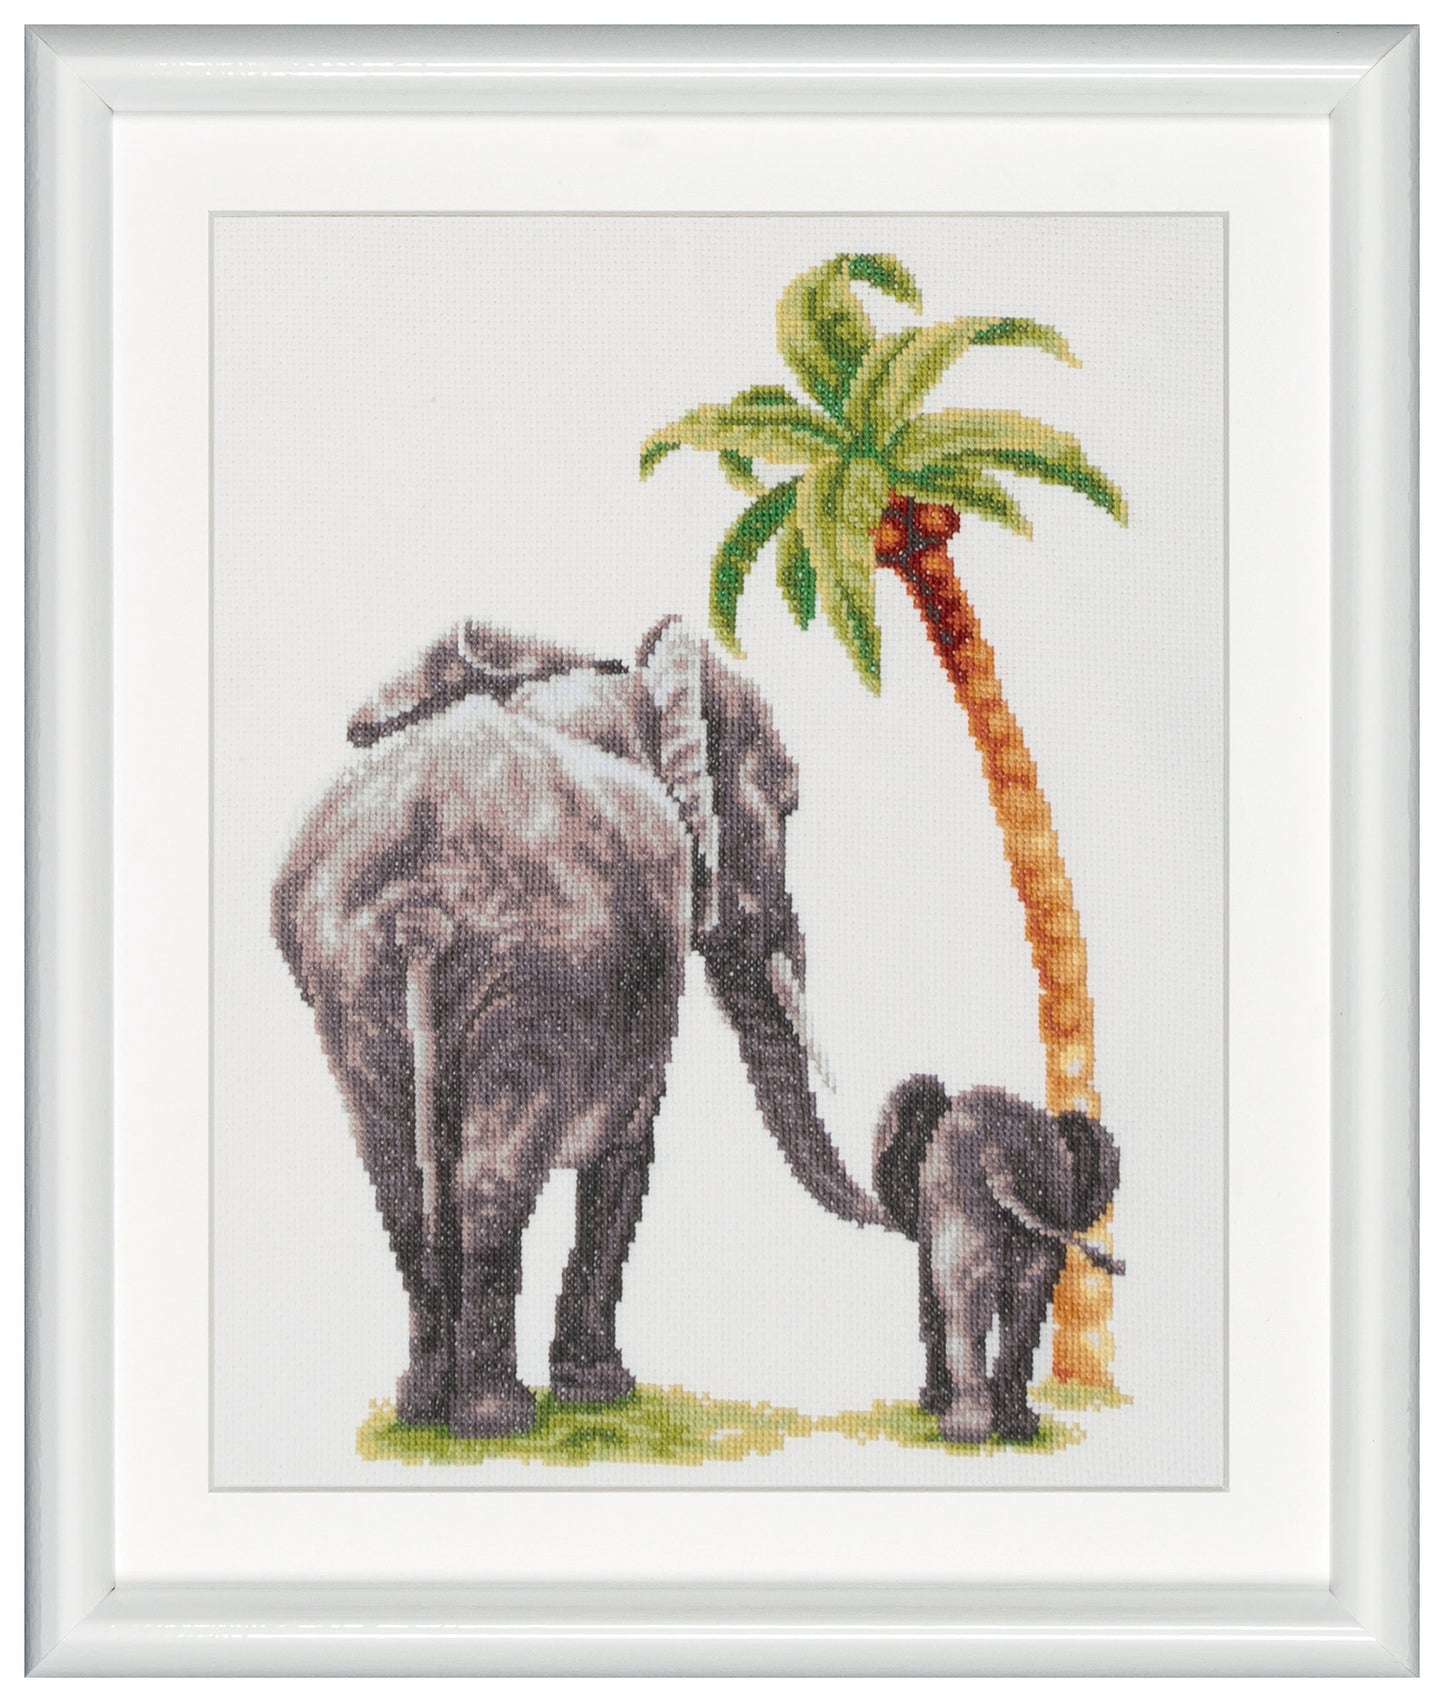 Decorate your home with this cross-stitch embroidery kit. The beautiful design of an elephant walking together with her the baby and a palm tree on the side, has a beautiful contrasting color scheme of dark gray, white, green, and brown. DSB cross stitch kits have easy to follow design charts and contain all items needed to facilitate embroidery without hassle. To cater to both beginners as well as advanced stitching artists.